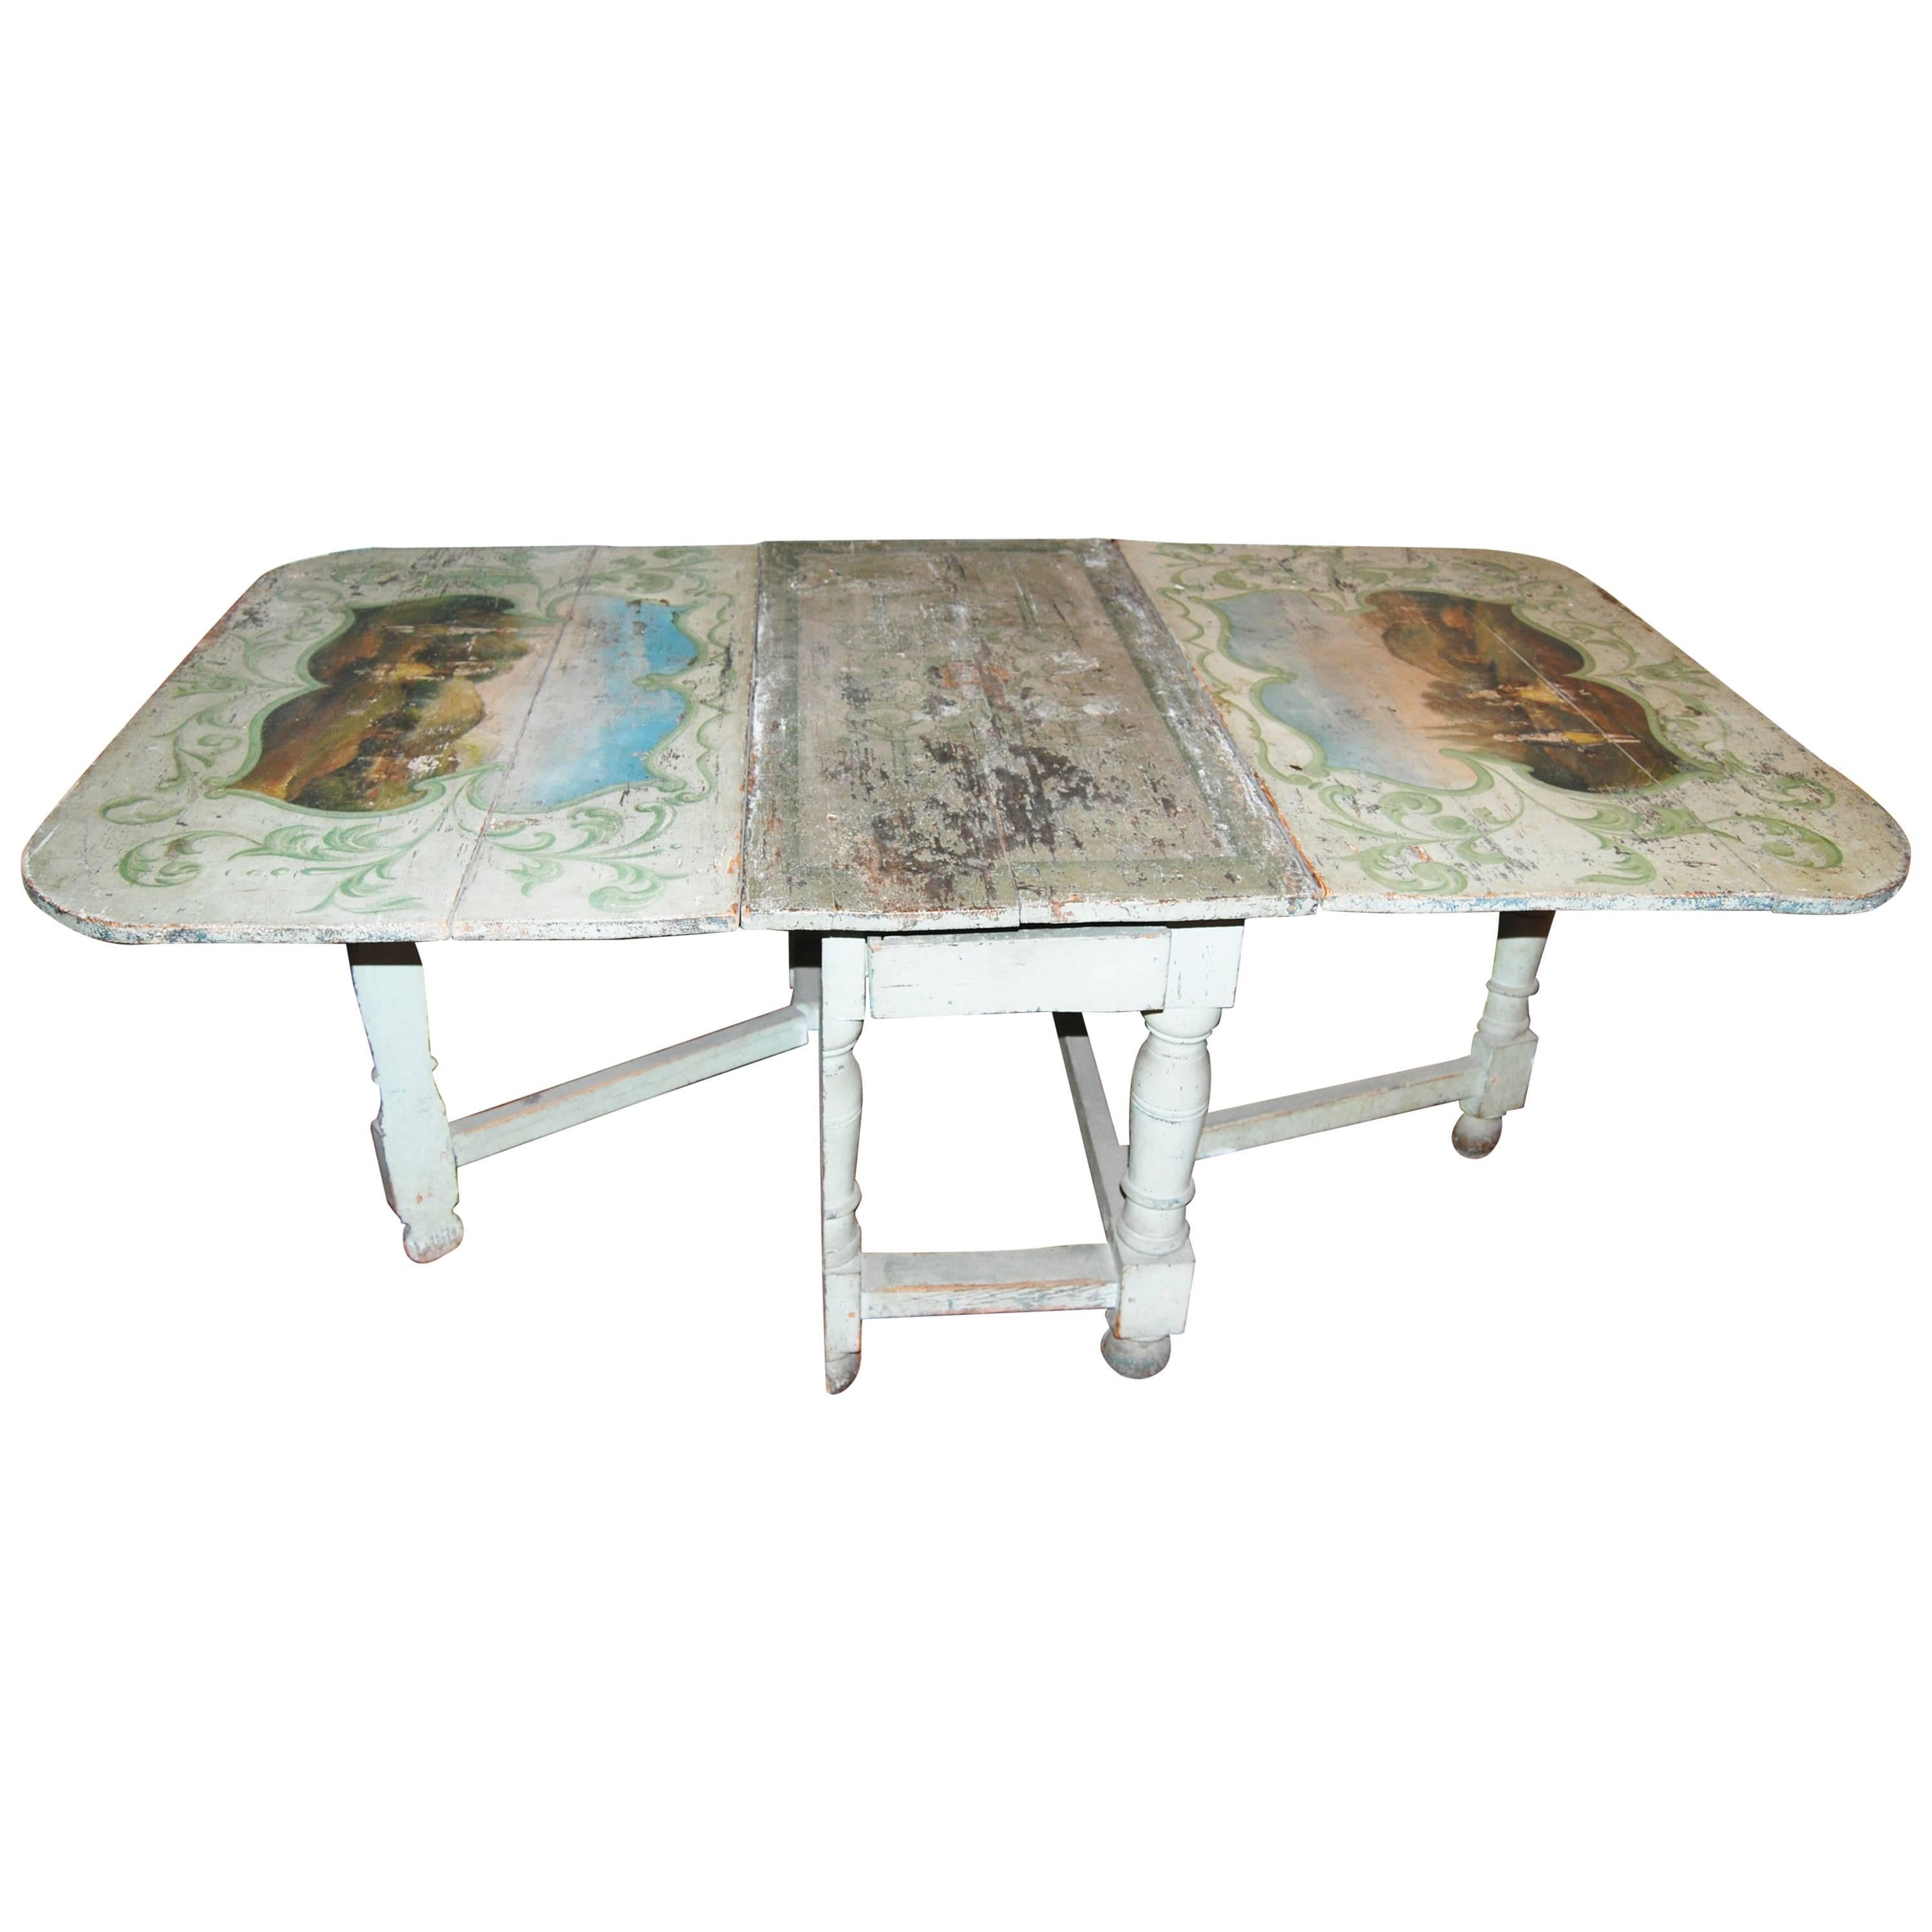 18th century Painted French Gateleg Table